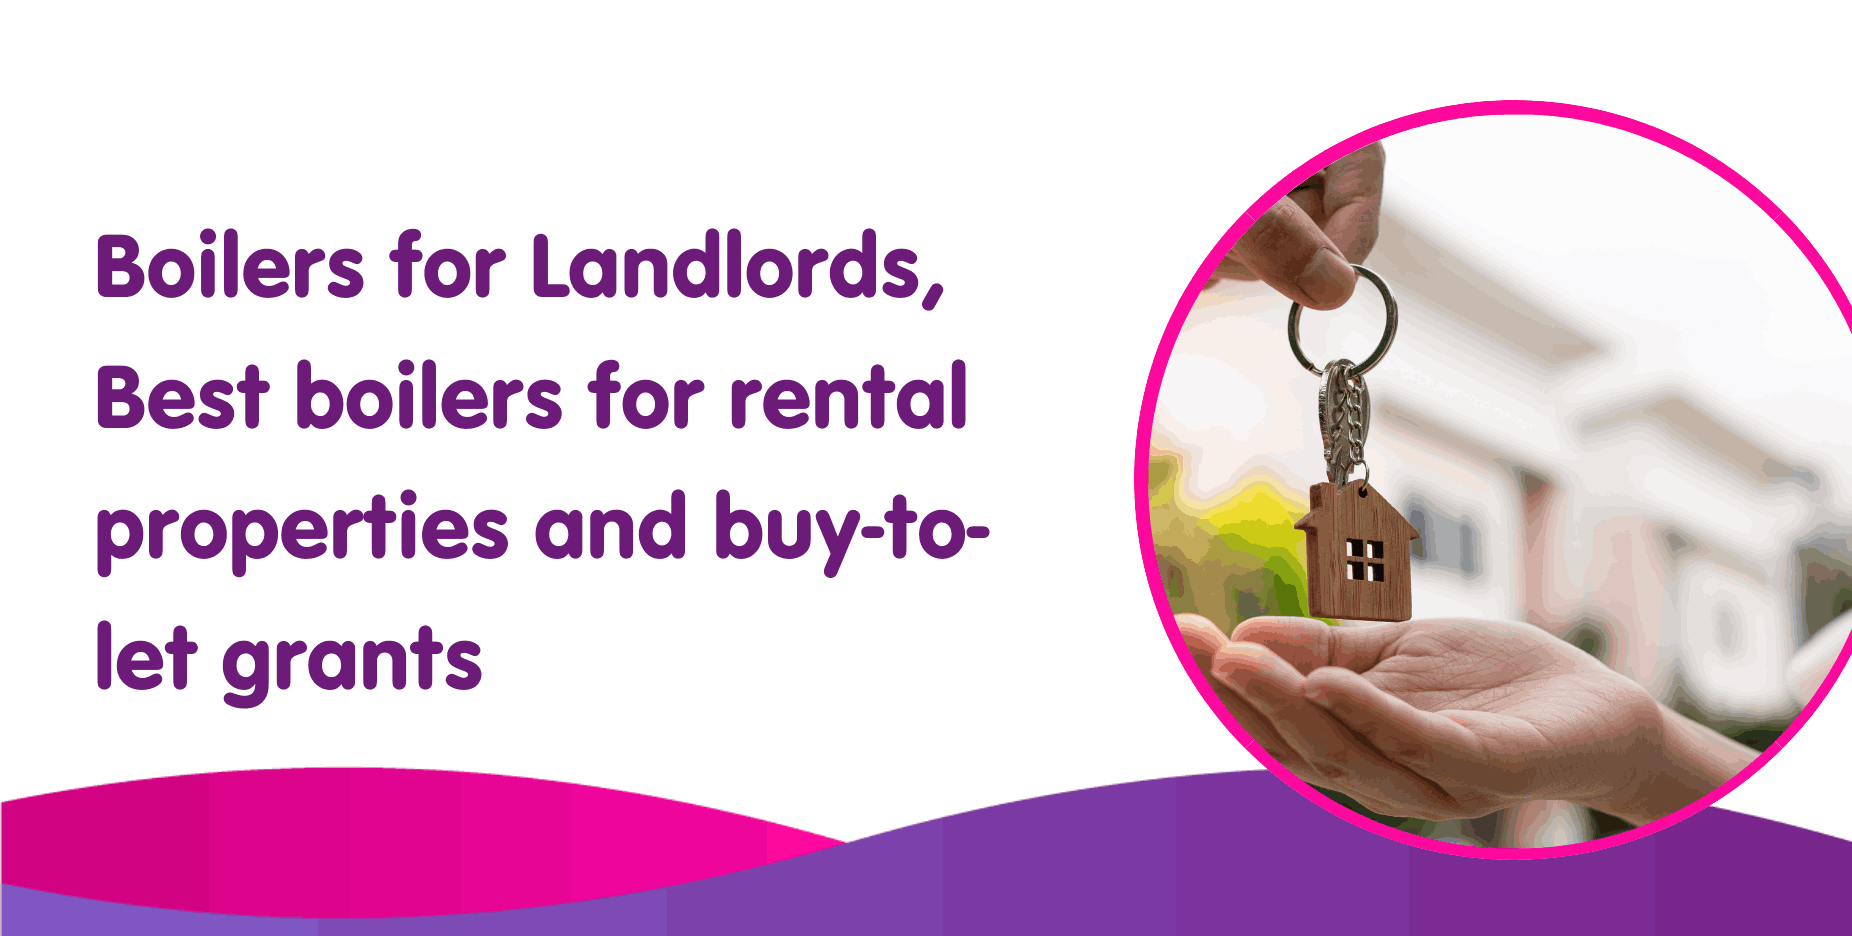 Boilers for Landlords, Best boilers for rental properties and buy-to-let grants